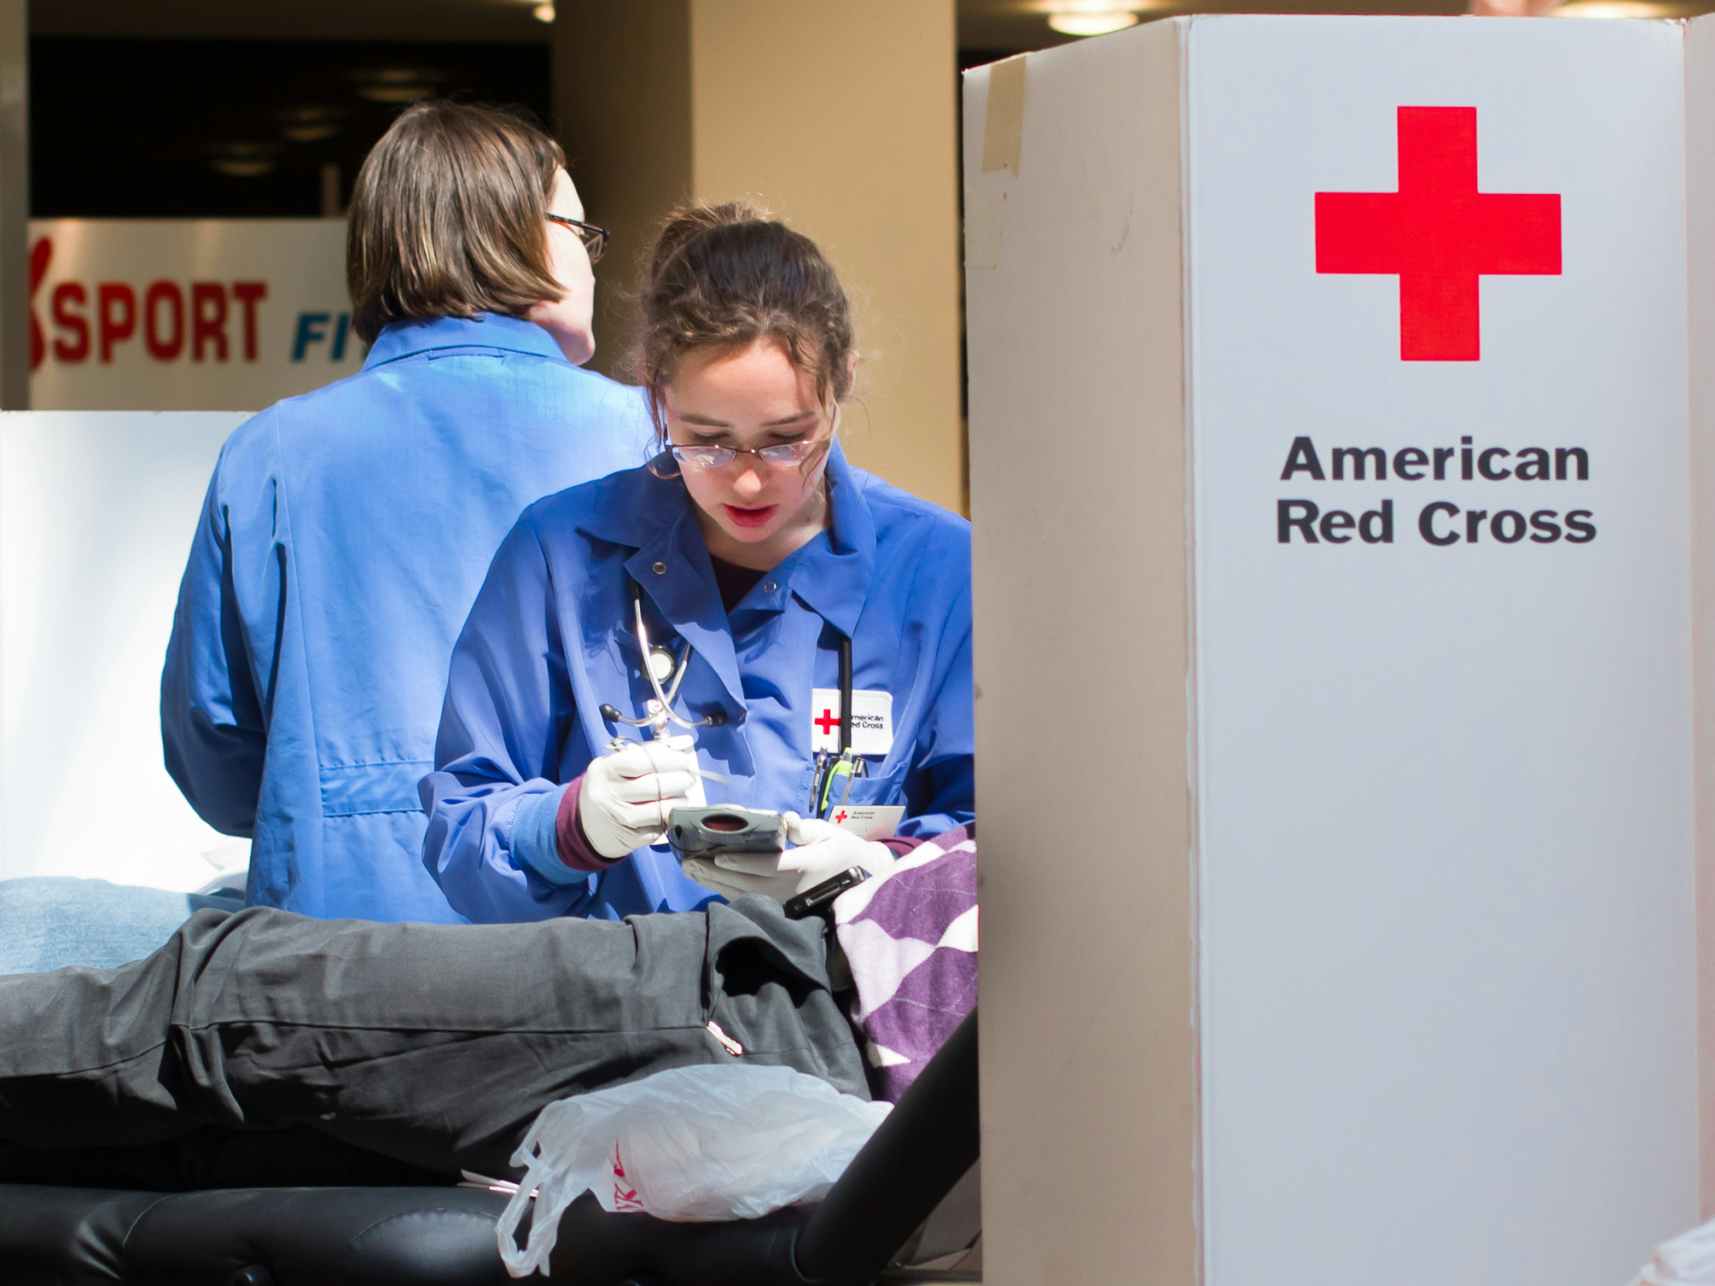 An American Red Cross healthcare professional taking blood from a donor